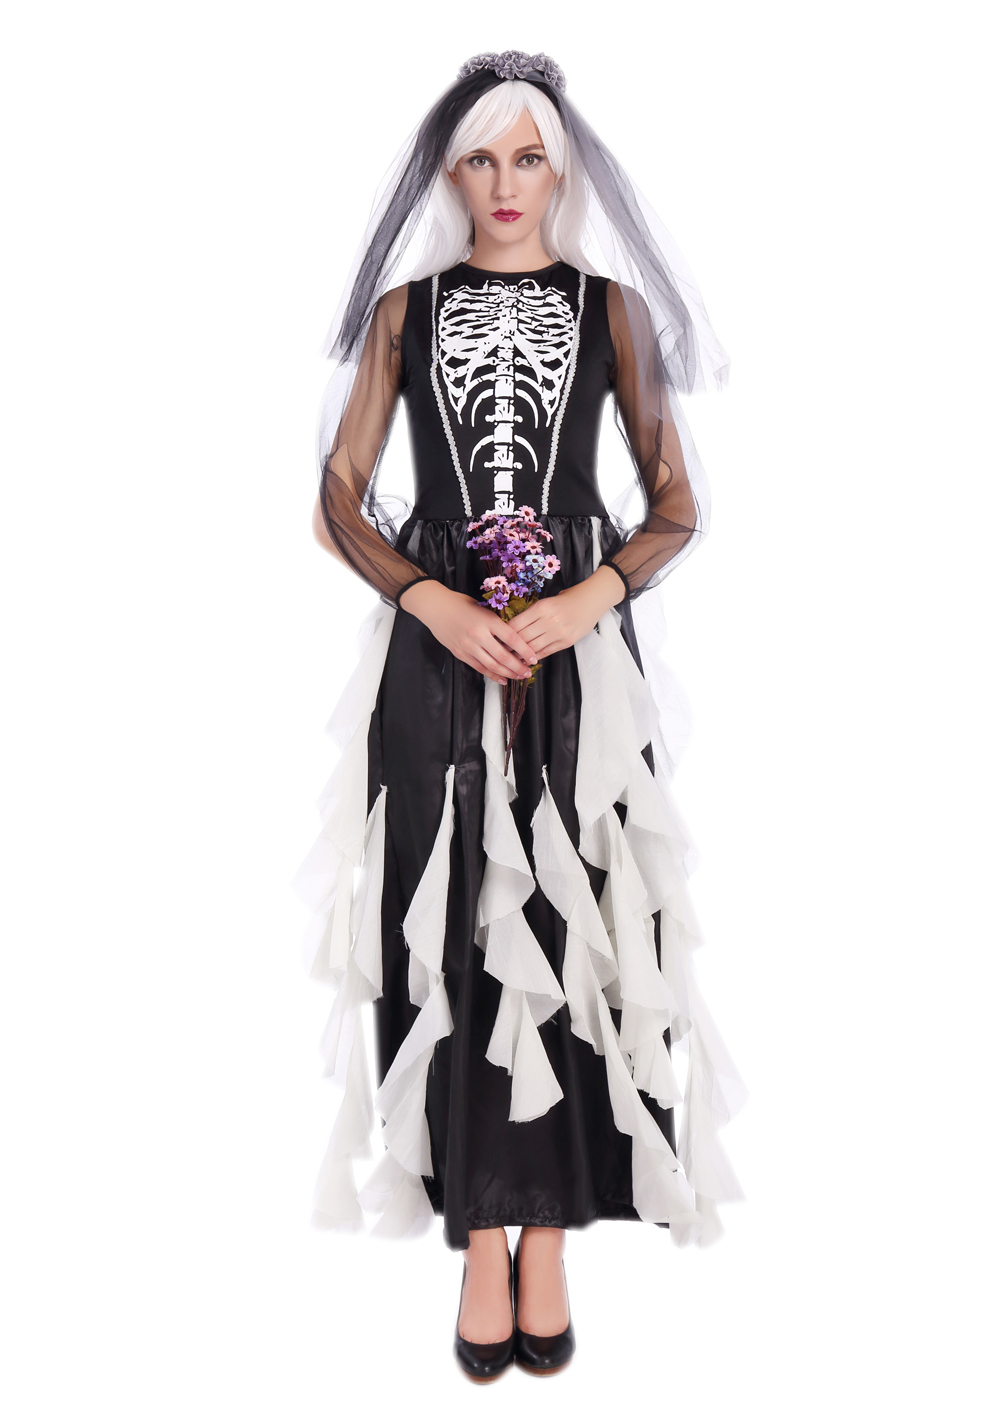 F1680 black and white zombie bride skeleton costume,it comes with headwear,dress